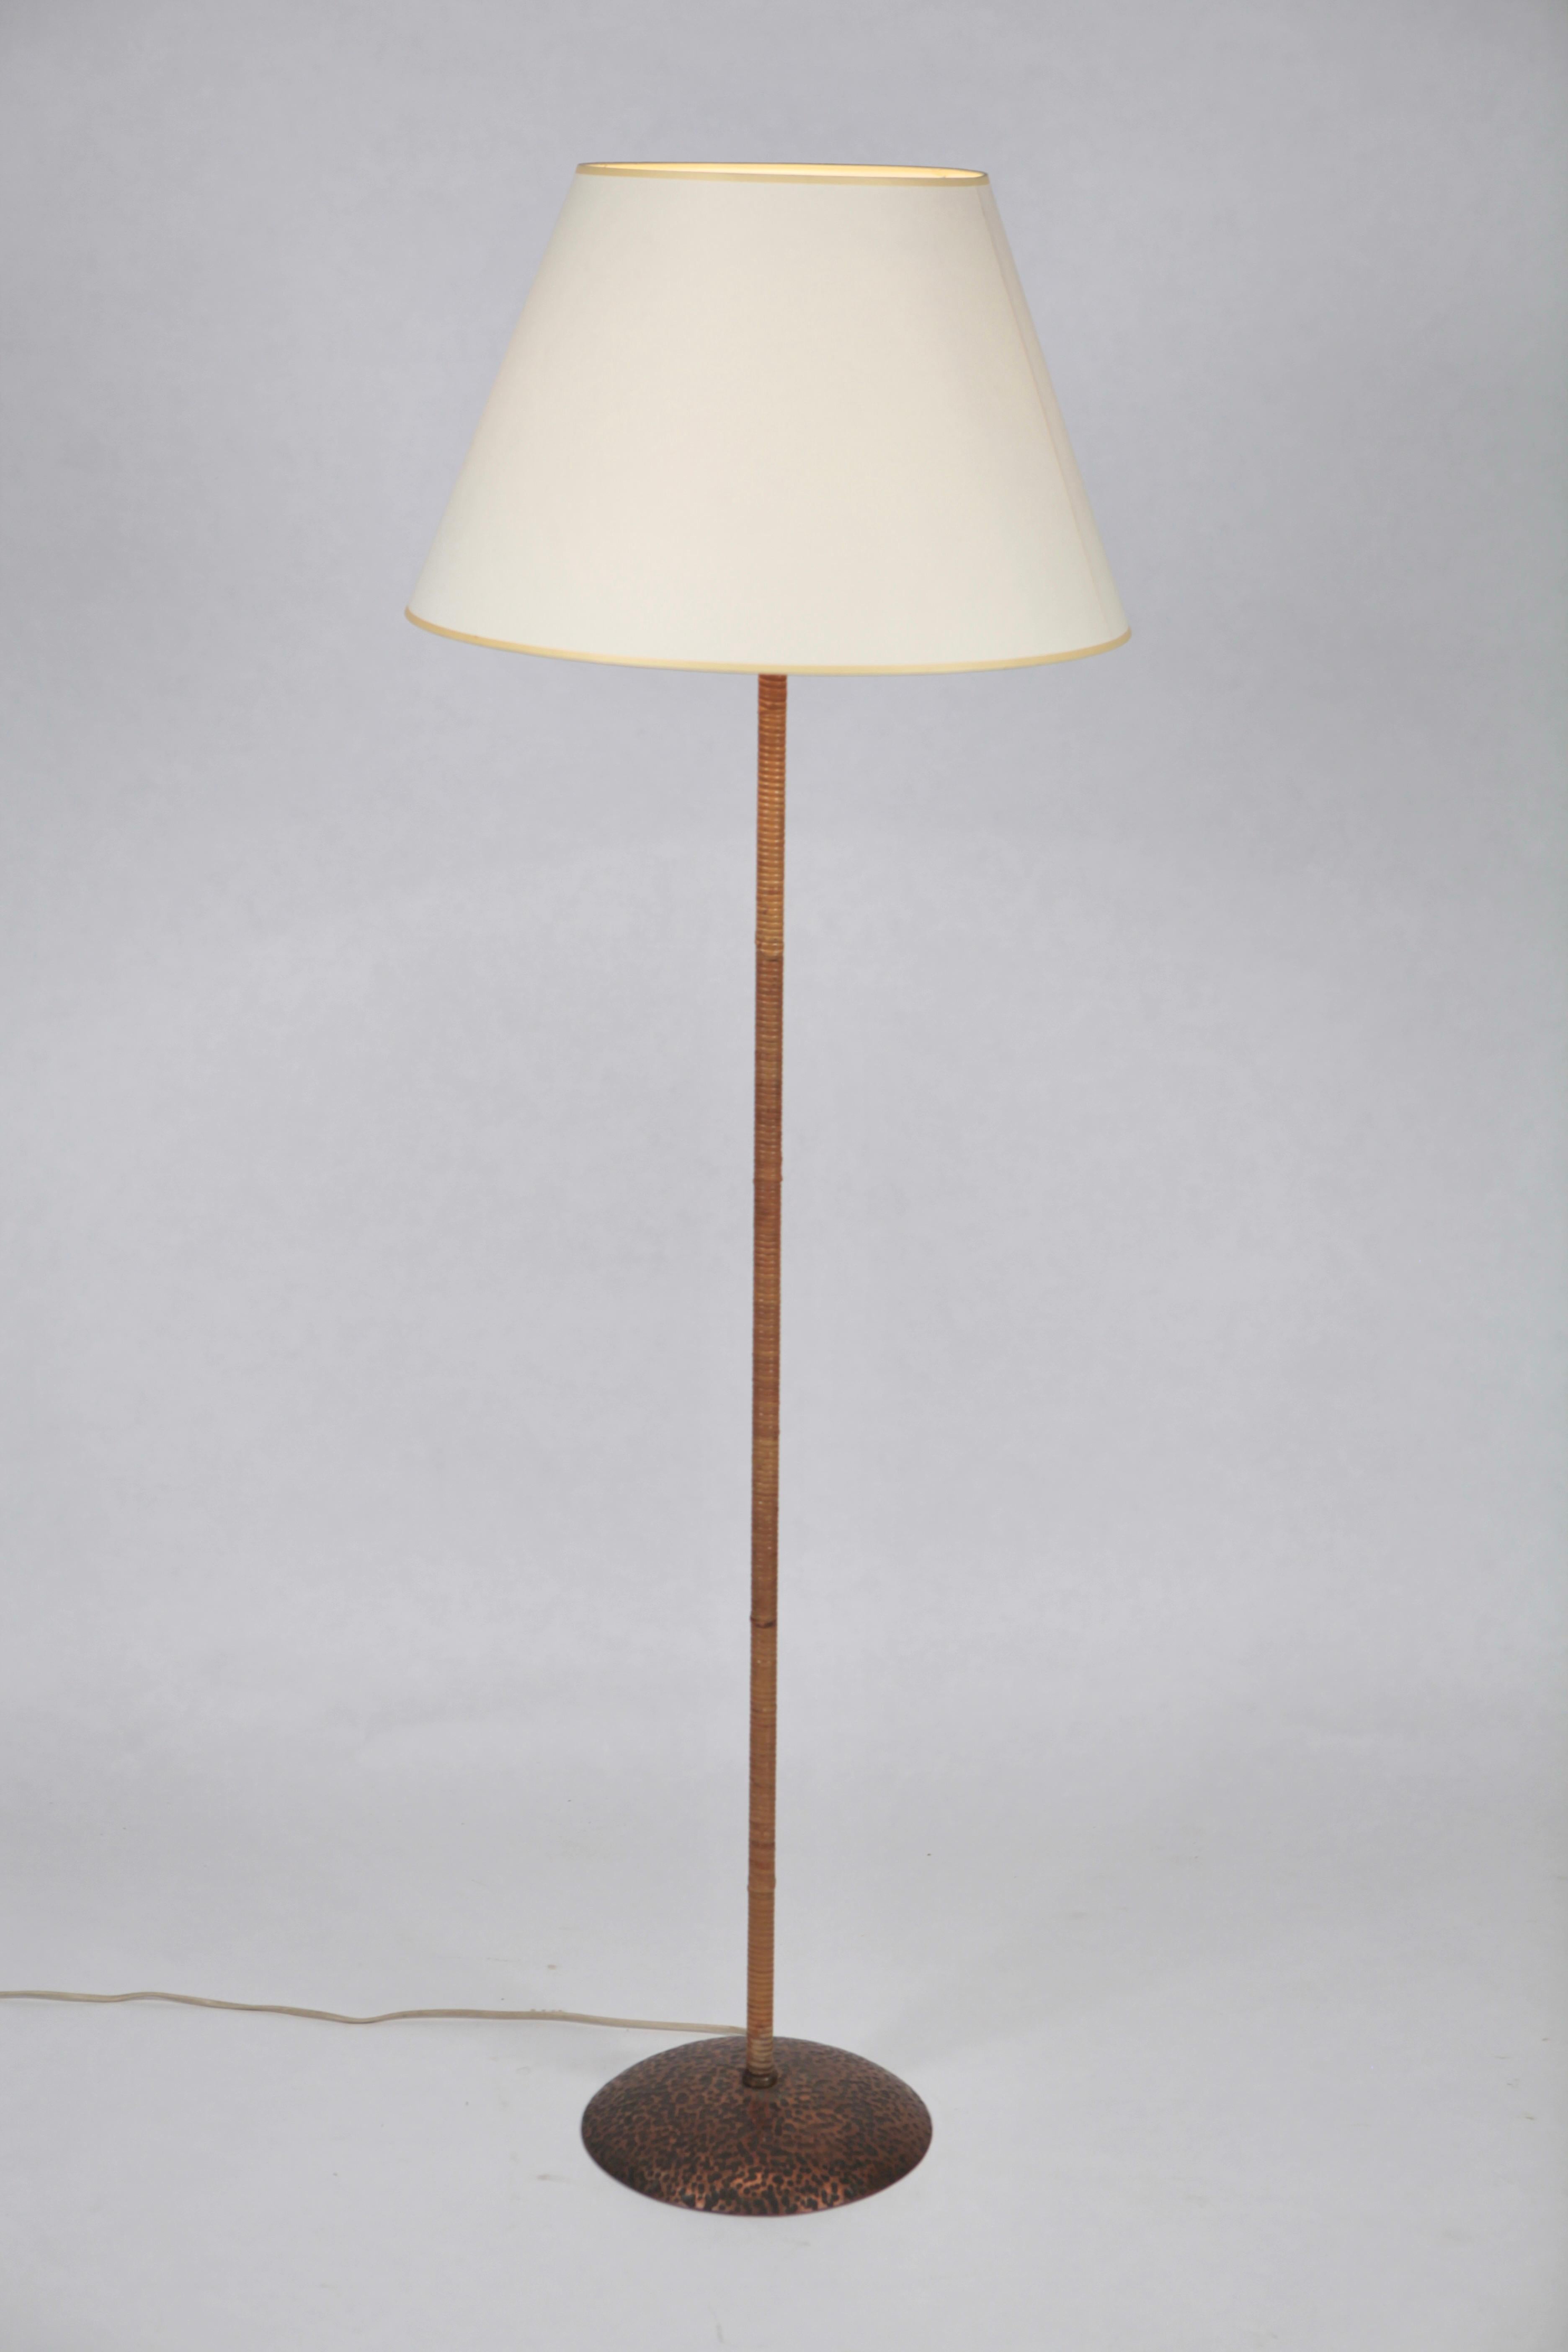 Floor-lamp, attributed to Paavo Tynell. Rattan covered stem & hand hammered copper base.
Executed in Finland in the 1940s.
Excellent vintage condition & great patina.
Original wiring should be replaced to your local requirements.
The shade is